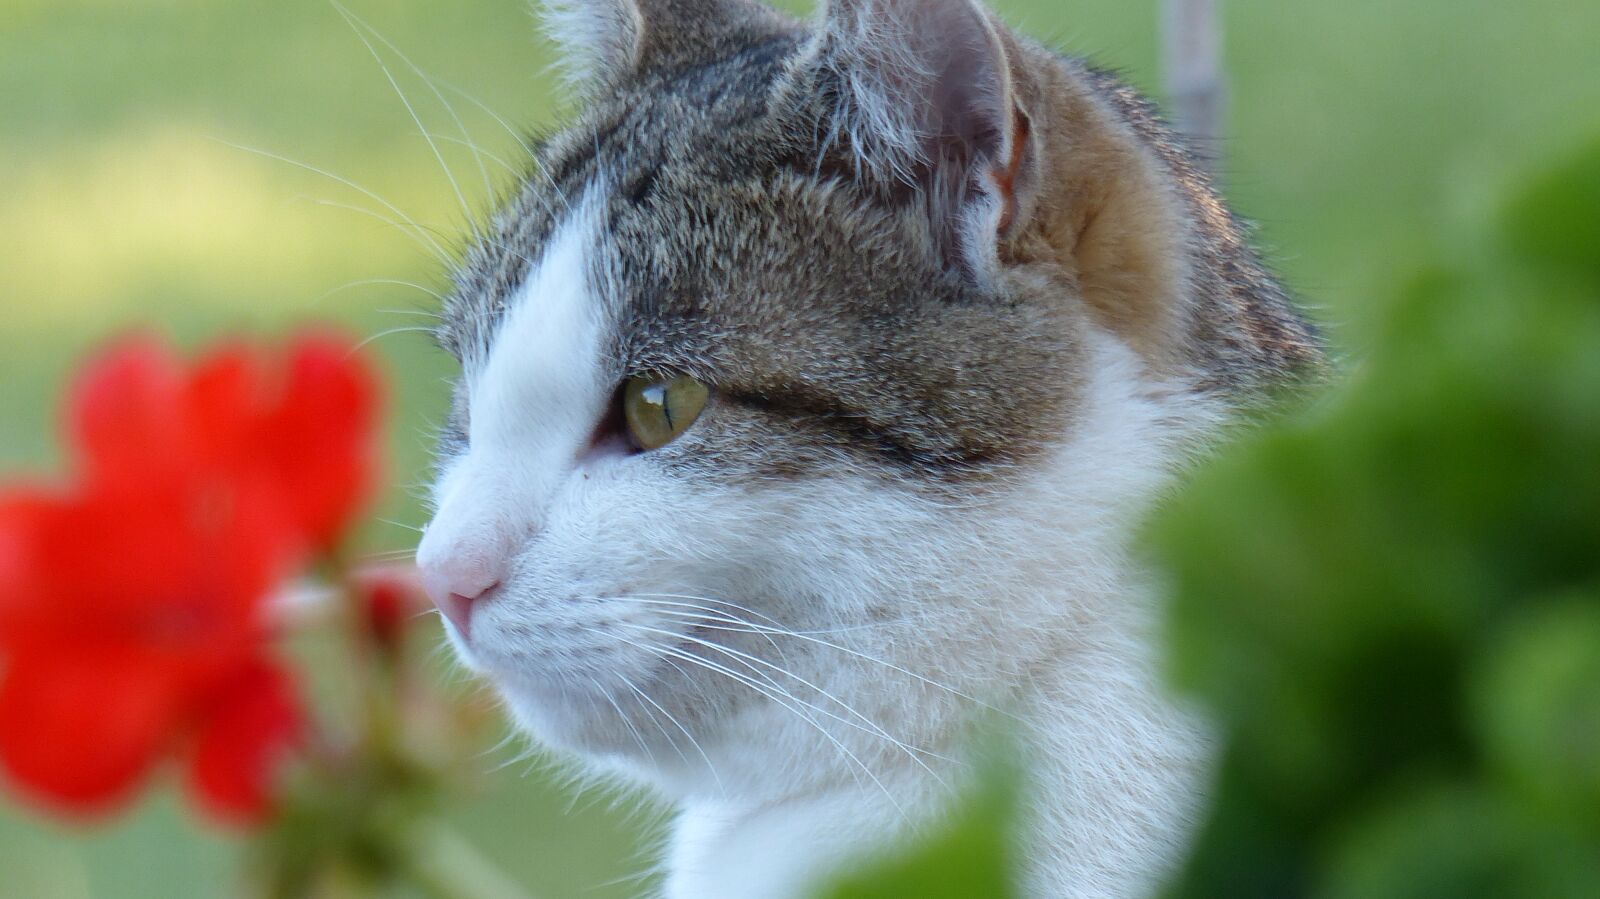 Leica V-Lux 4 sample photo. Cat, nature, animal photography